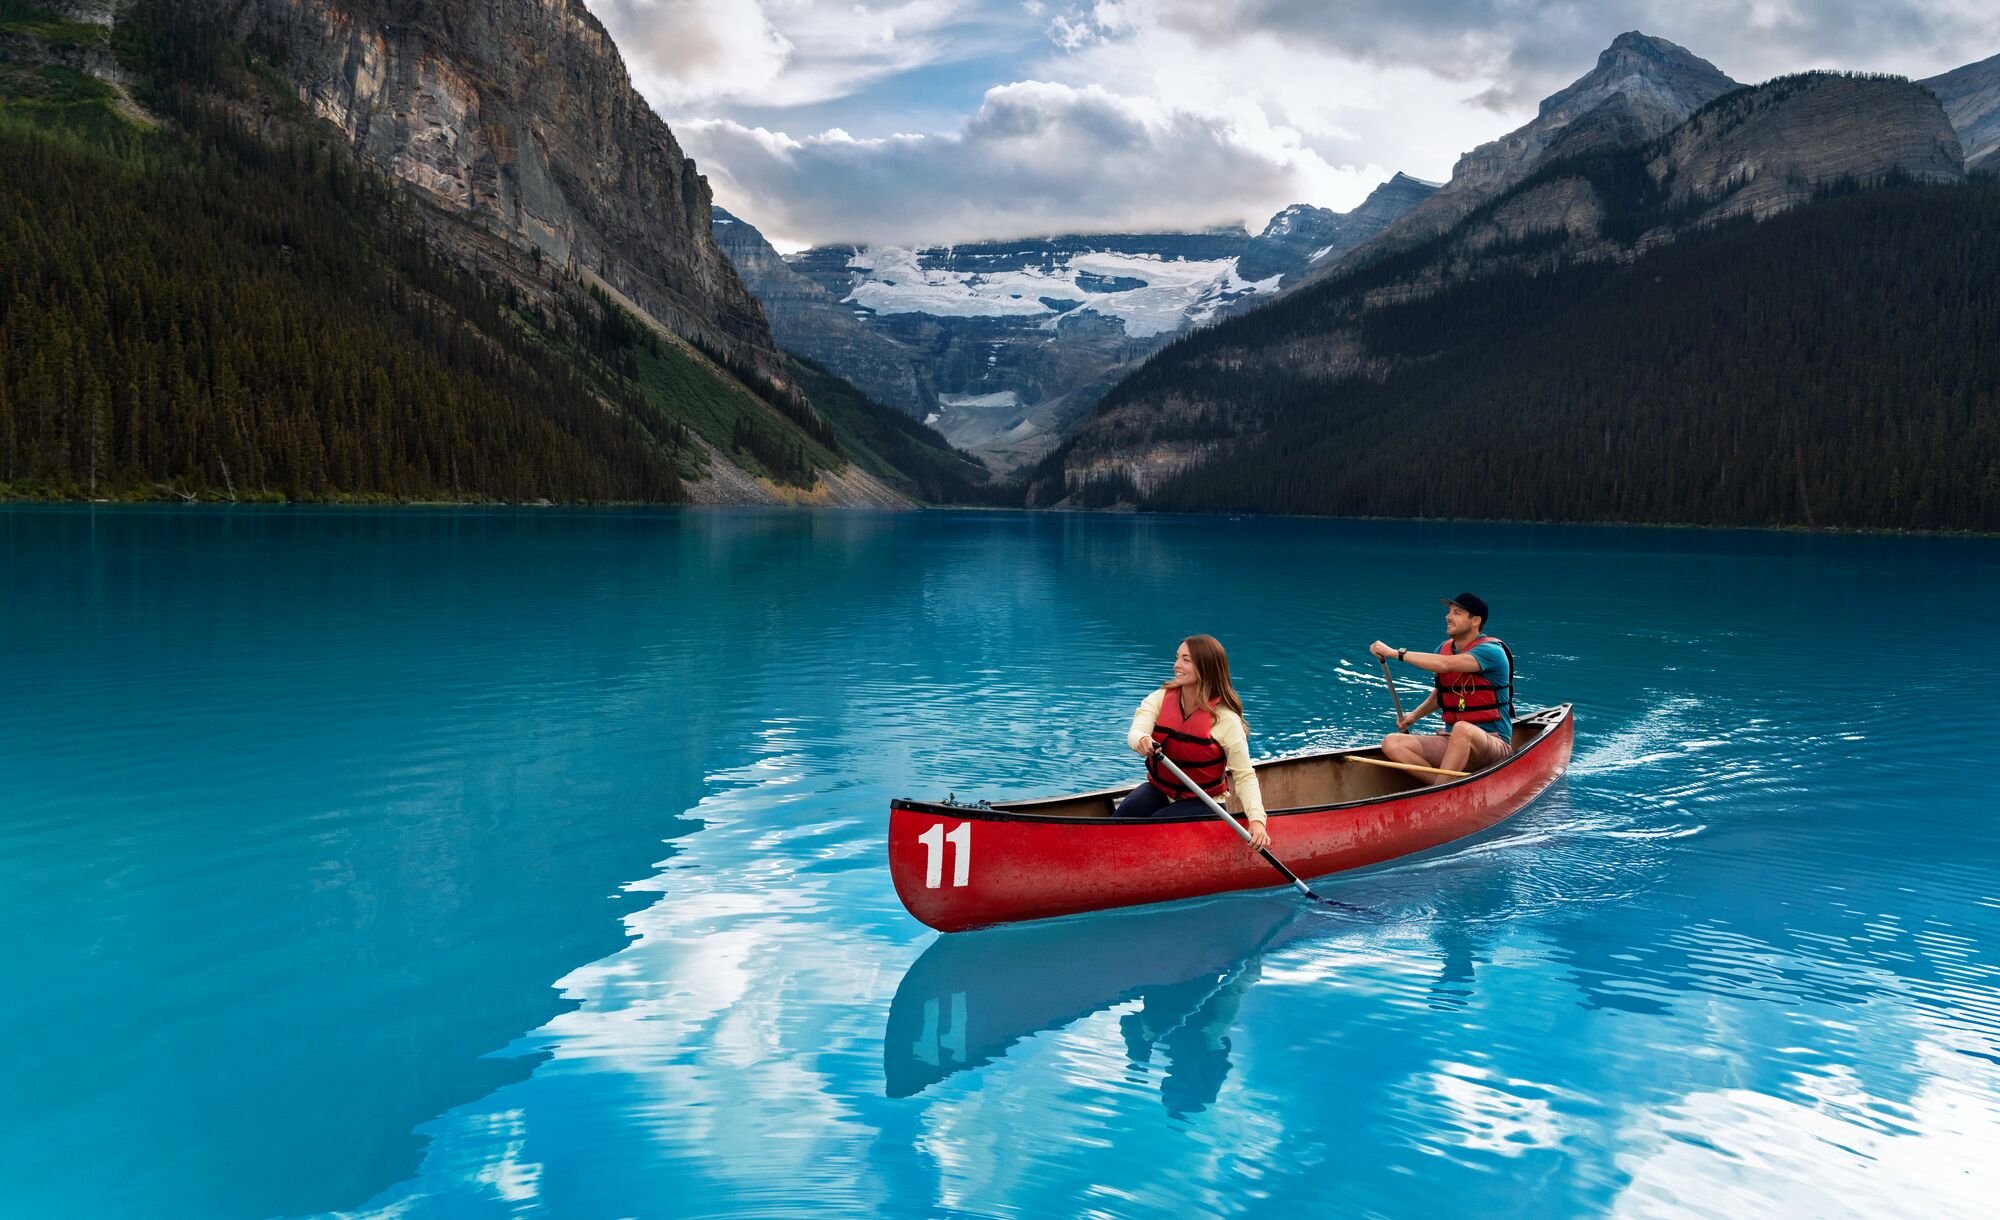 Two canoers on Lake Louise in Banff National Park.